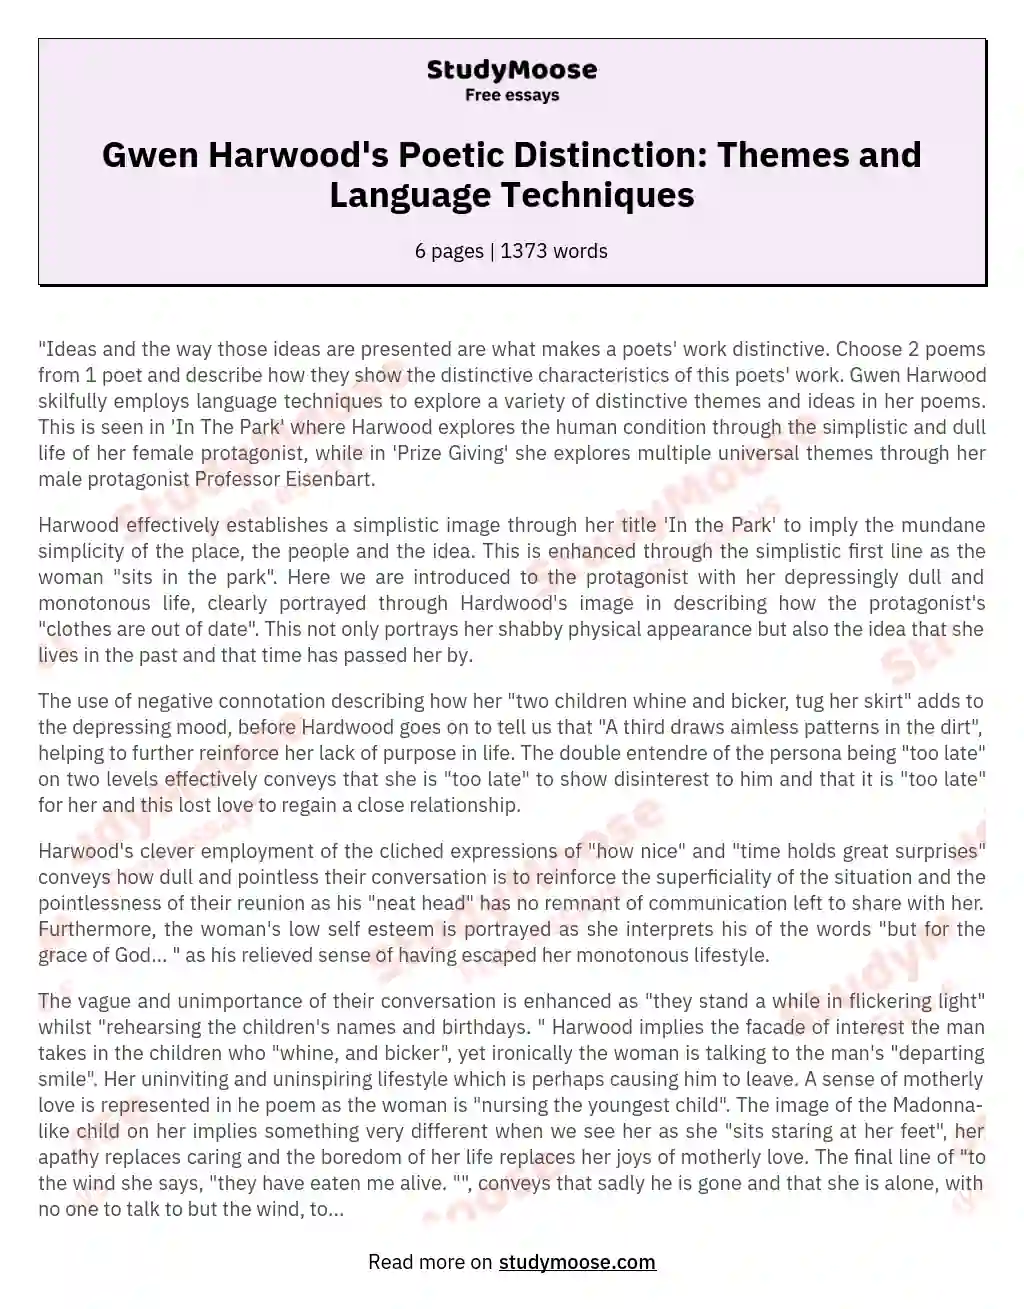 Gwen Harwood's Poetic Distinction: Themes and Language Techniques essay